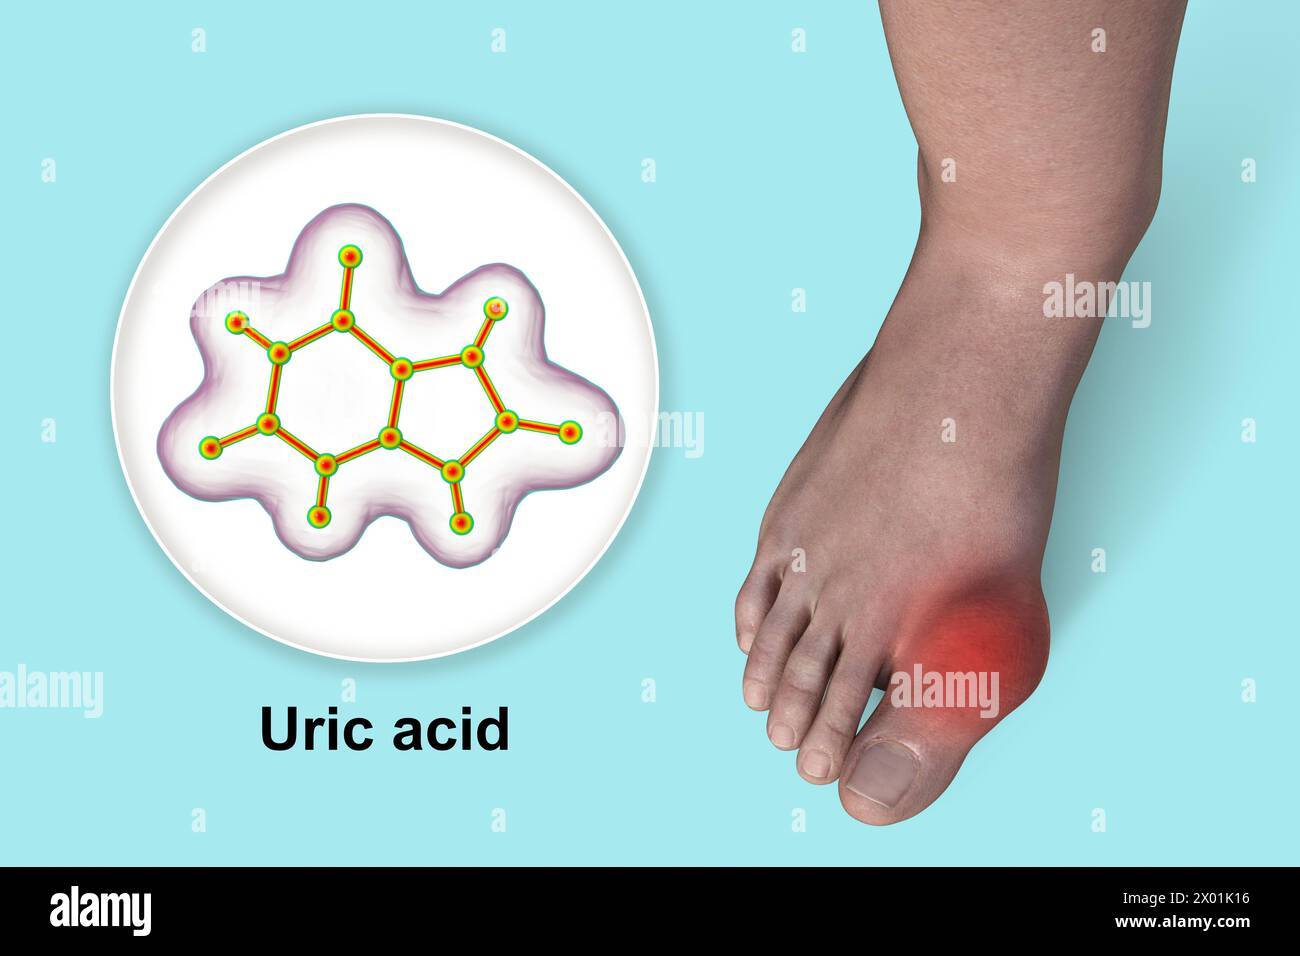 Illustration of gout-afflicted foot and close-up view of uric acid molecule, revealing the destructive impact of chronic uric acid crystal deposition. Stock Photo